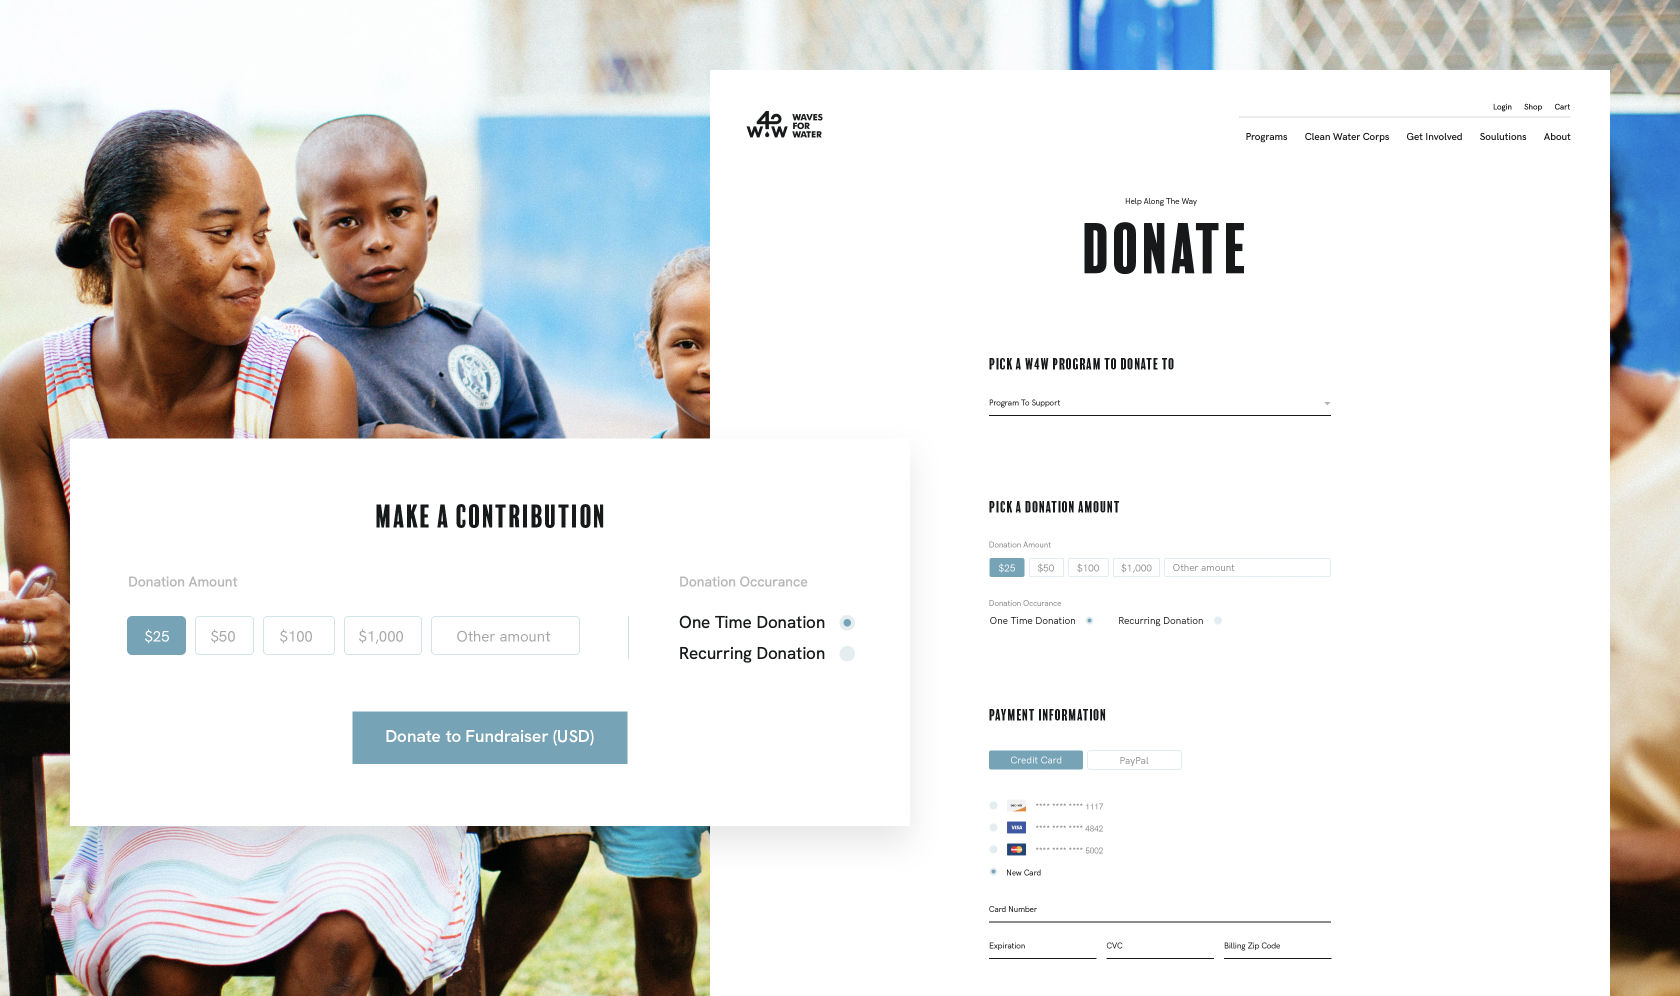 Waves for Water donation page designs